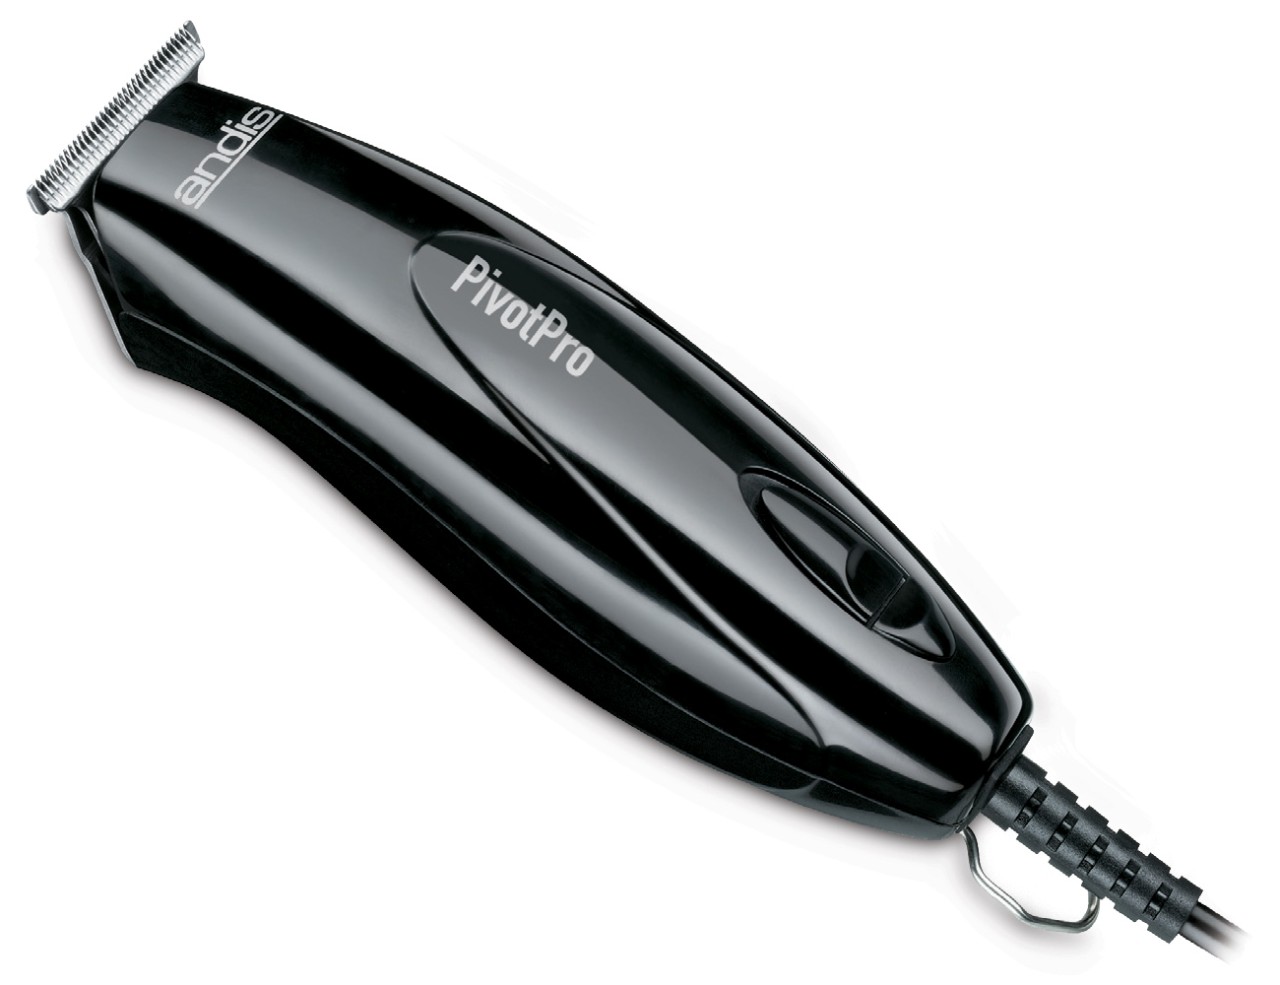 andis clippers pivot pro